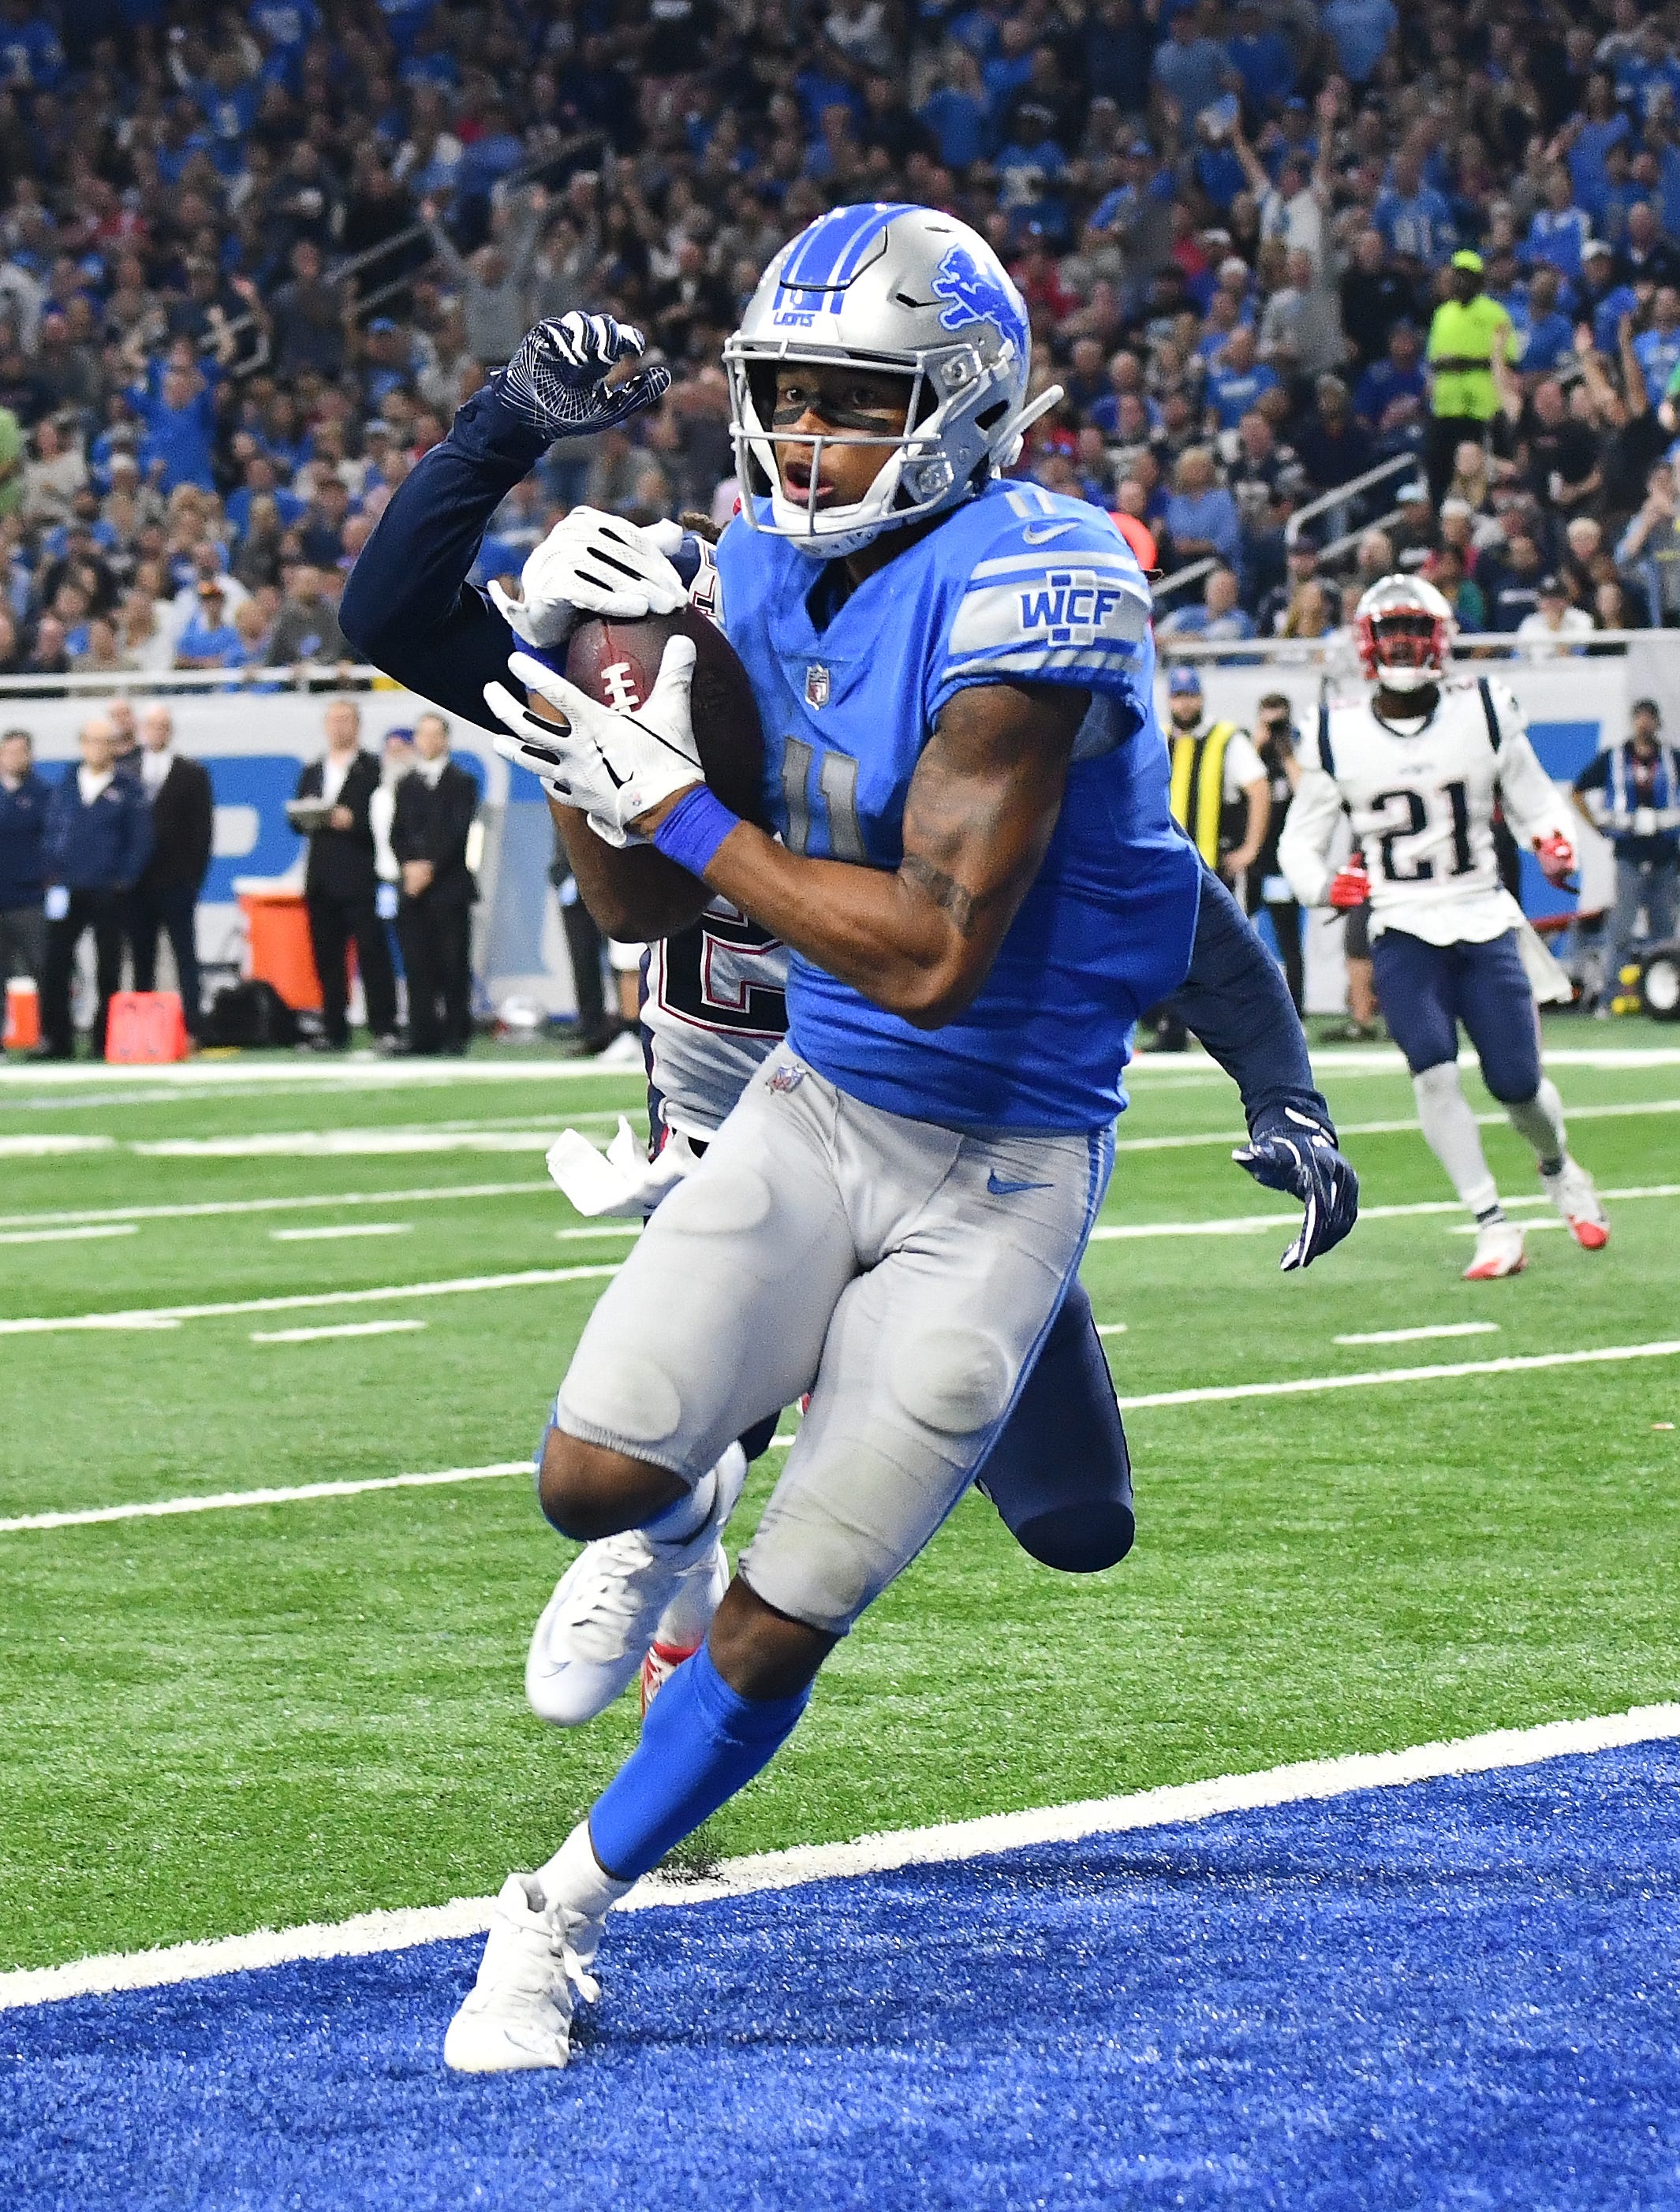 Lions wide receiver Marvin Jones Jr. readies for a touchdown reception in front of Patriots ' Stephon Gilmore in the third quarter.